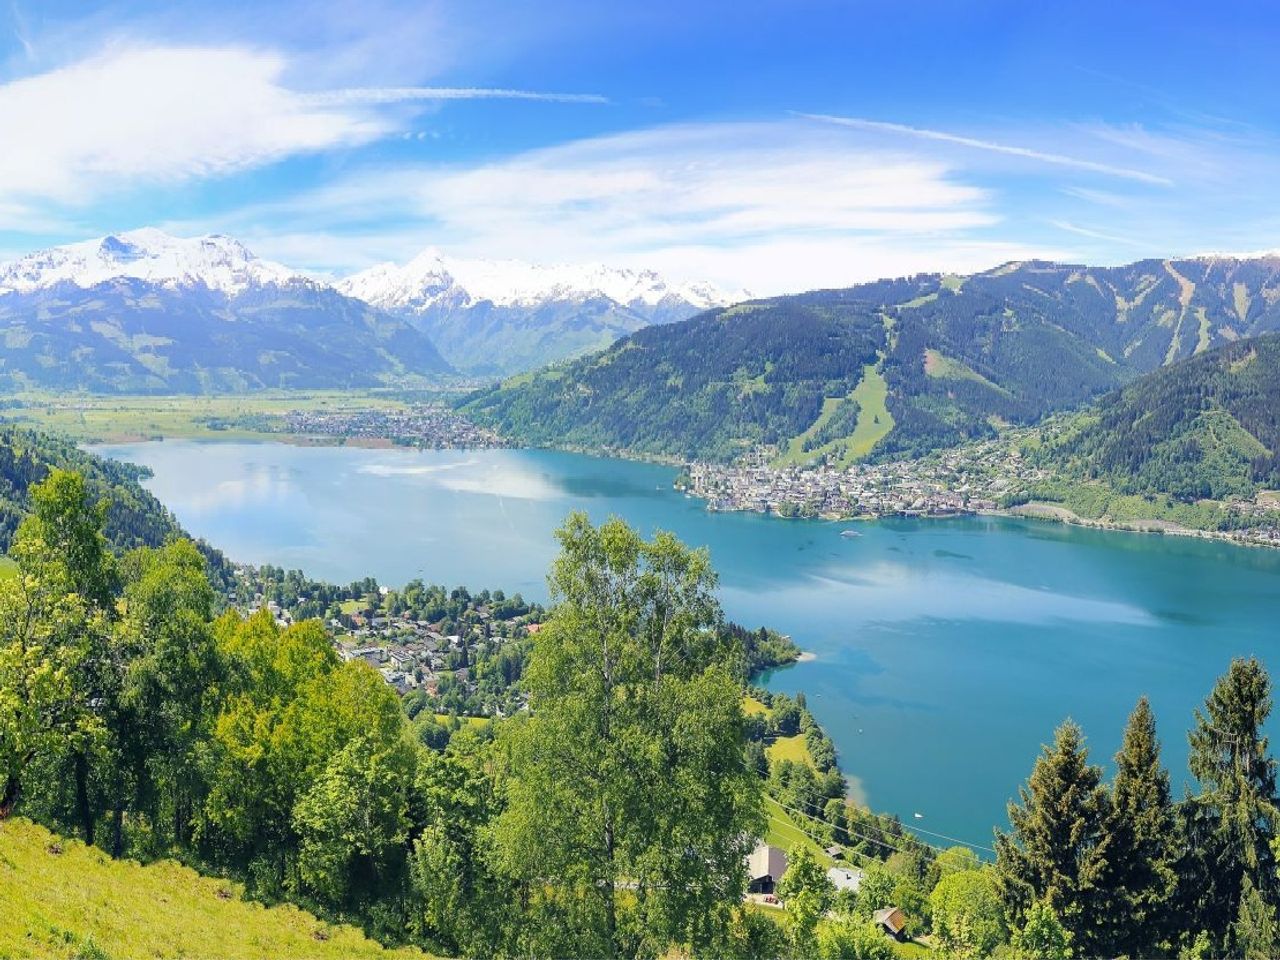 8 Tage Alpinlodges in Zell am See mit privater Sauna